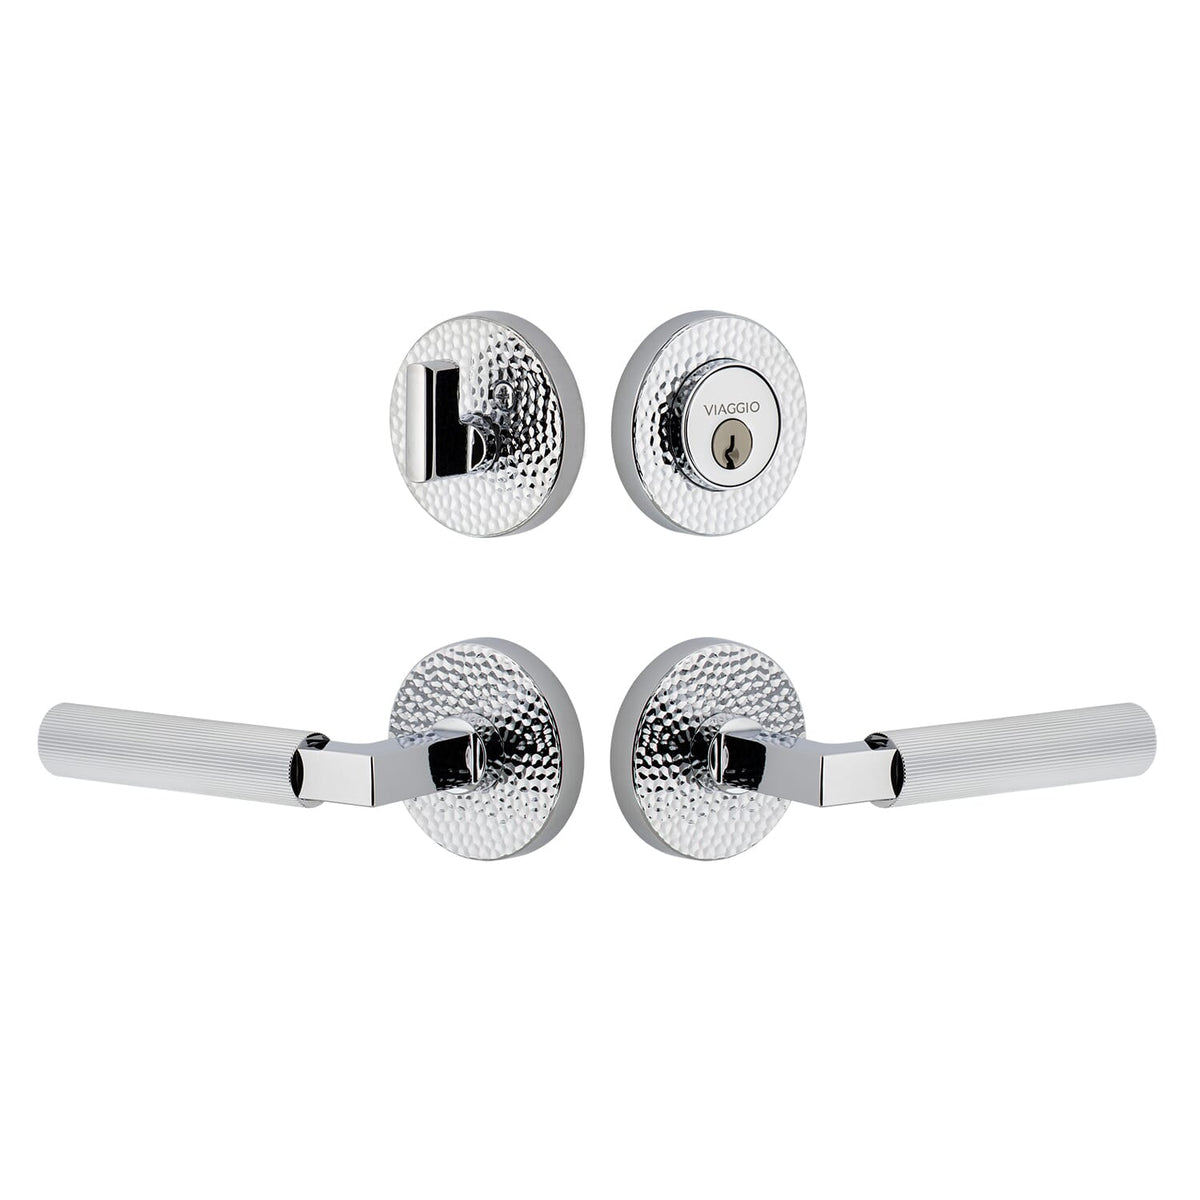 Circolo Hammered Rosette Entry Set with Contempo Fluted Lever  in Bright Chrome